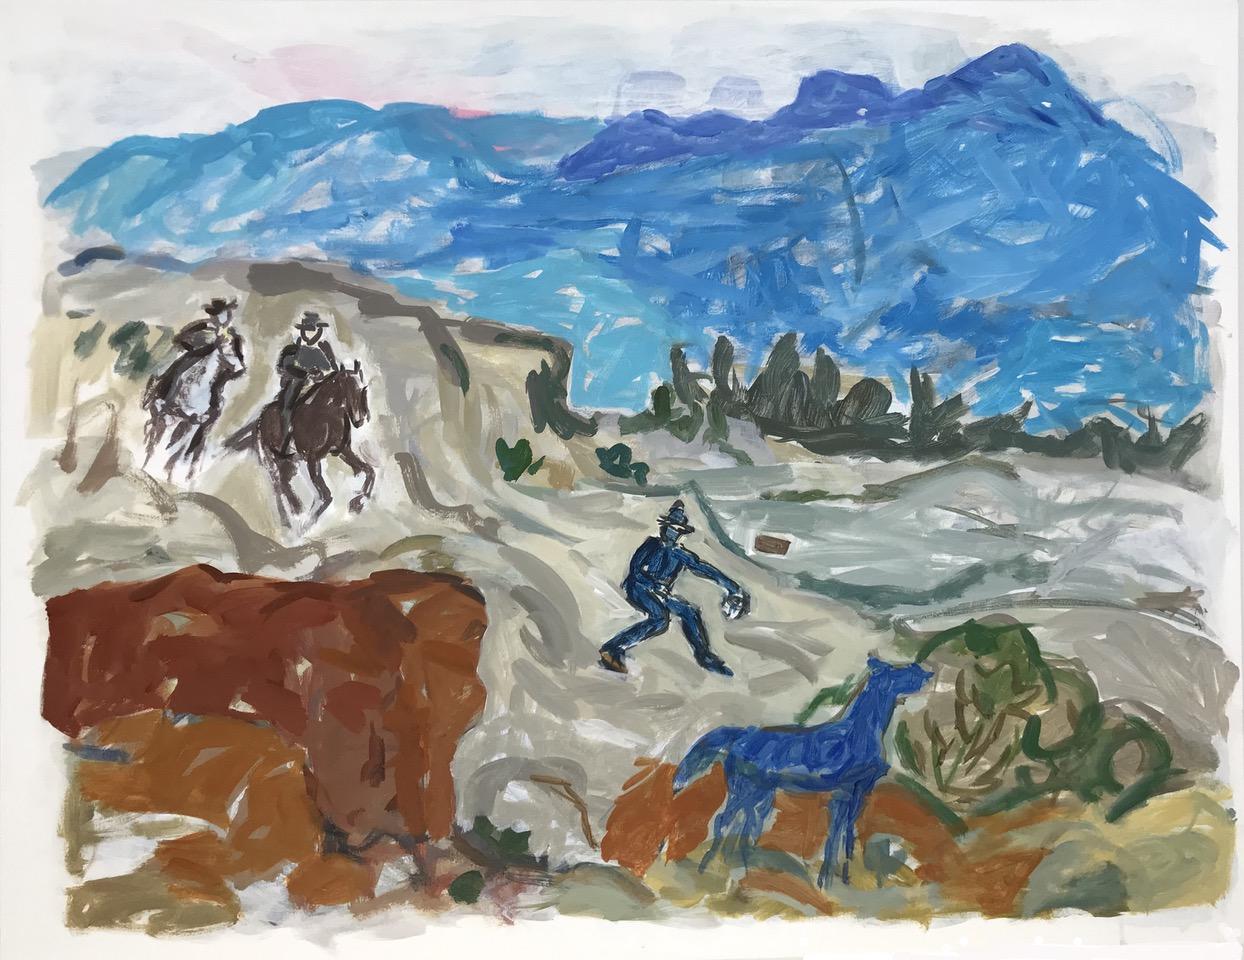 Linda Blackburn Figurative Painting - Contemporary Abstract Impressionist Cowboy Scene of Western Landscape w/ Horse 